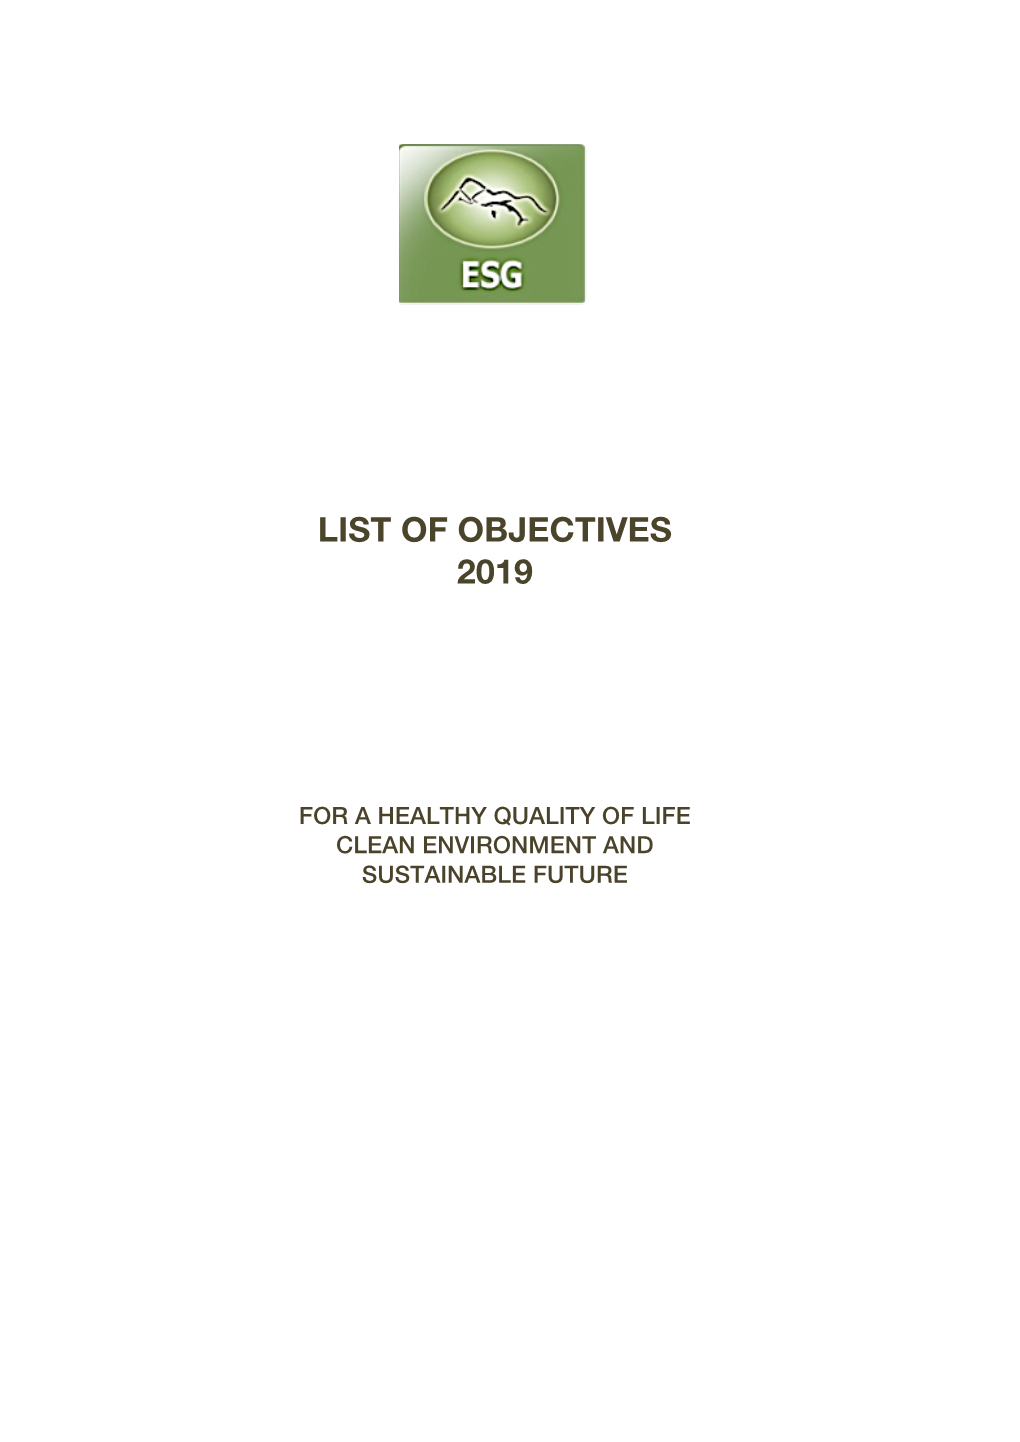 Objectives 2019